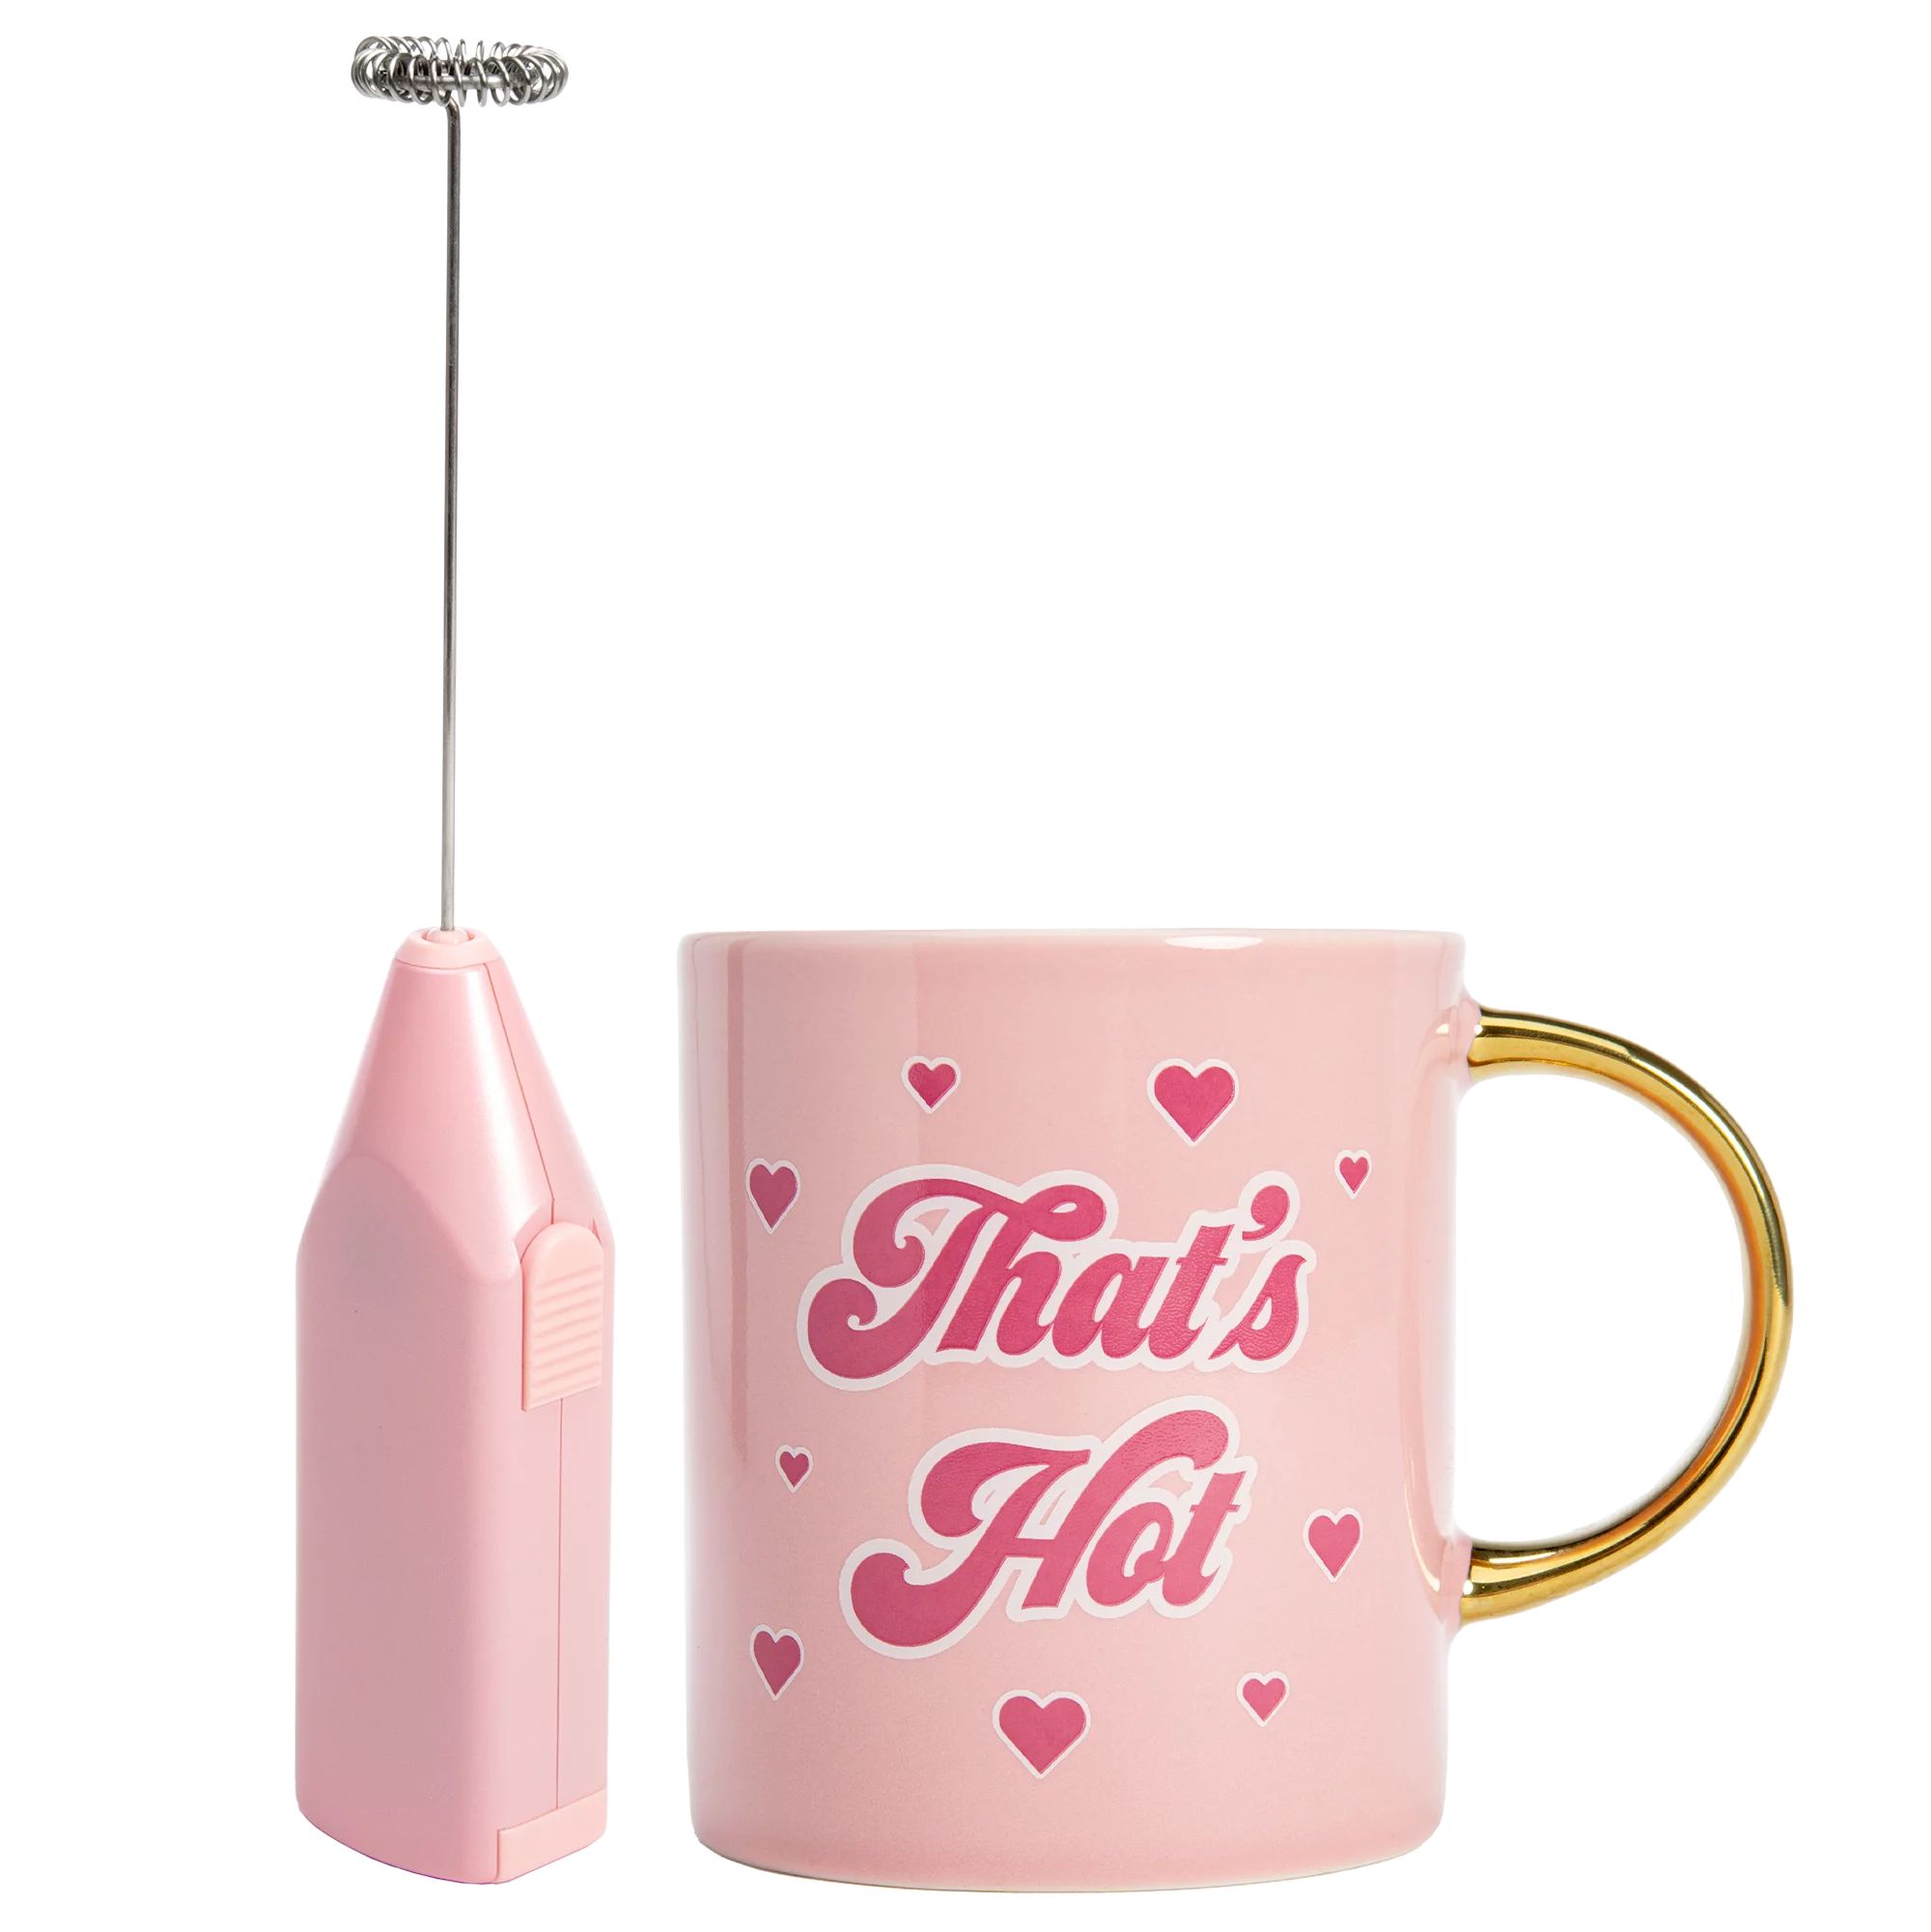 Paris Hilton "That's Hot" 16oz Ceramic Coffee Mug and Electric Milk Frother Set - Battery Powered... | Walmart (US)